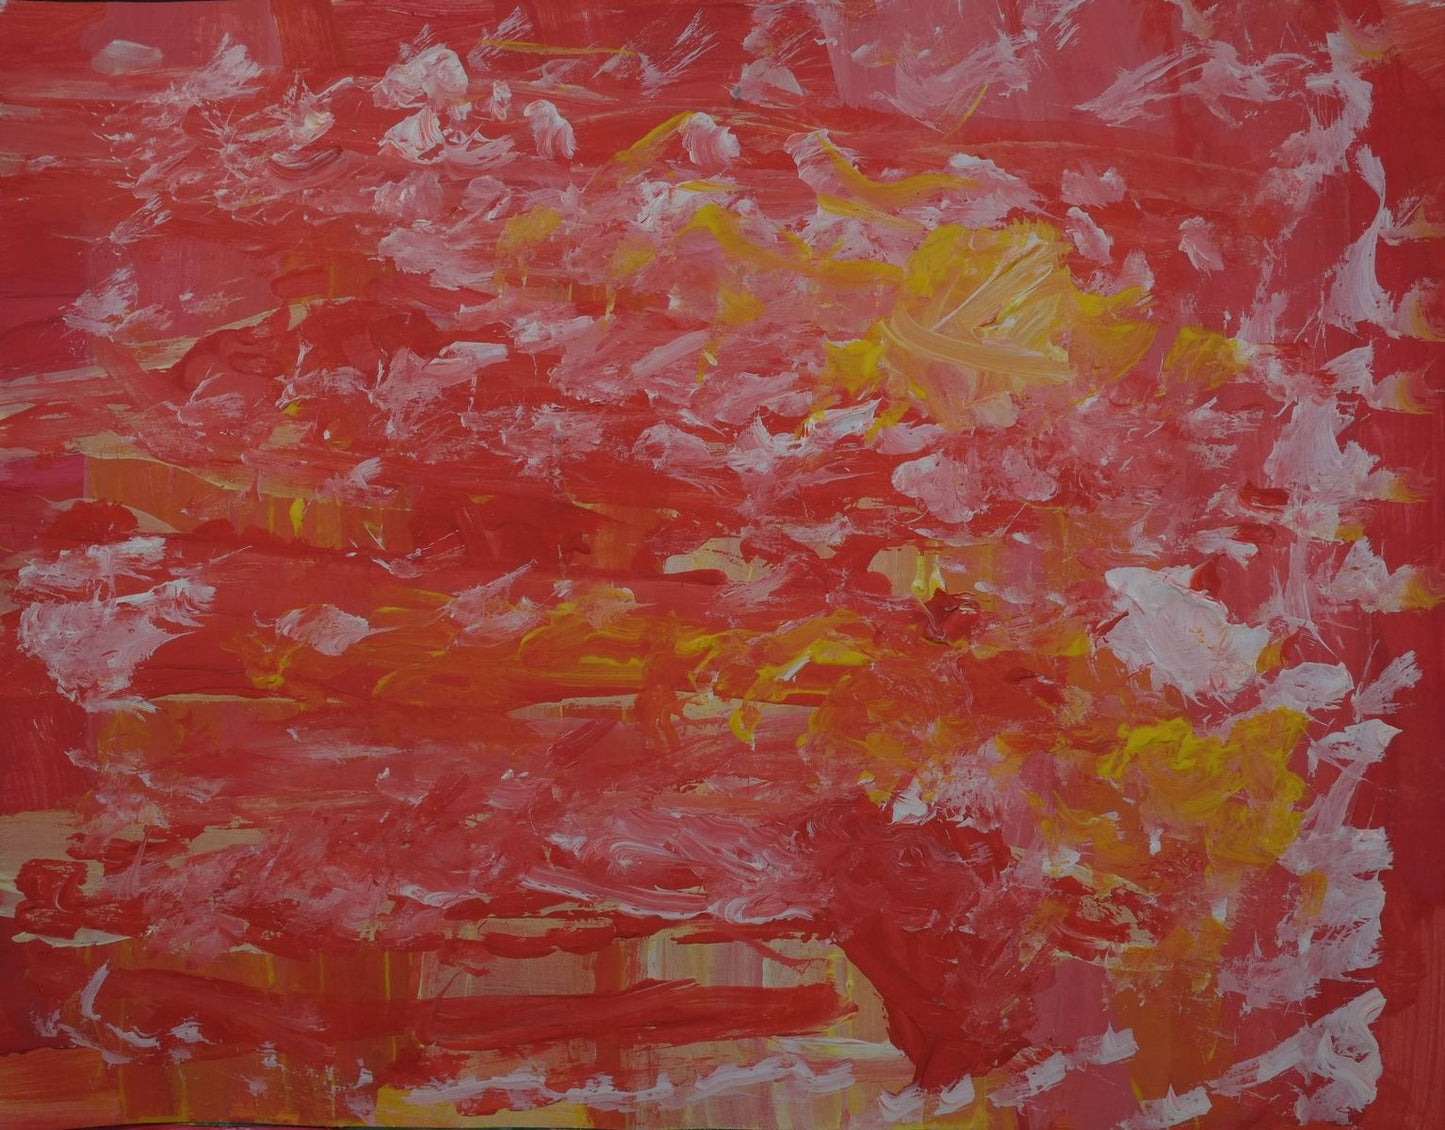 Acrylic on paper artwork with a red background beneath white and yellow paint dabs throughout